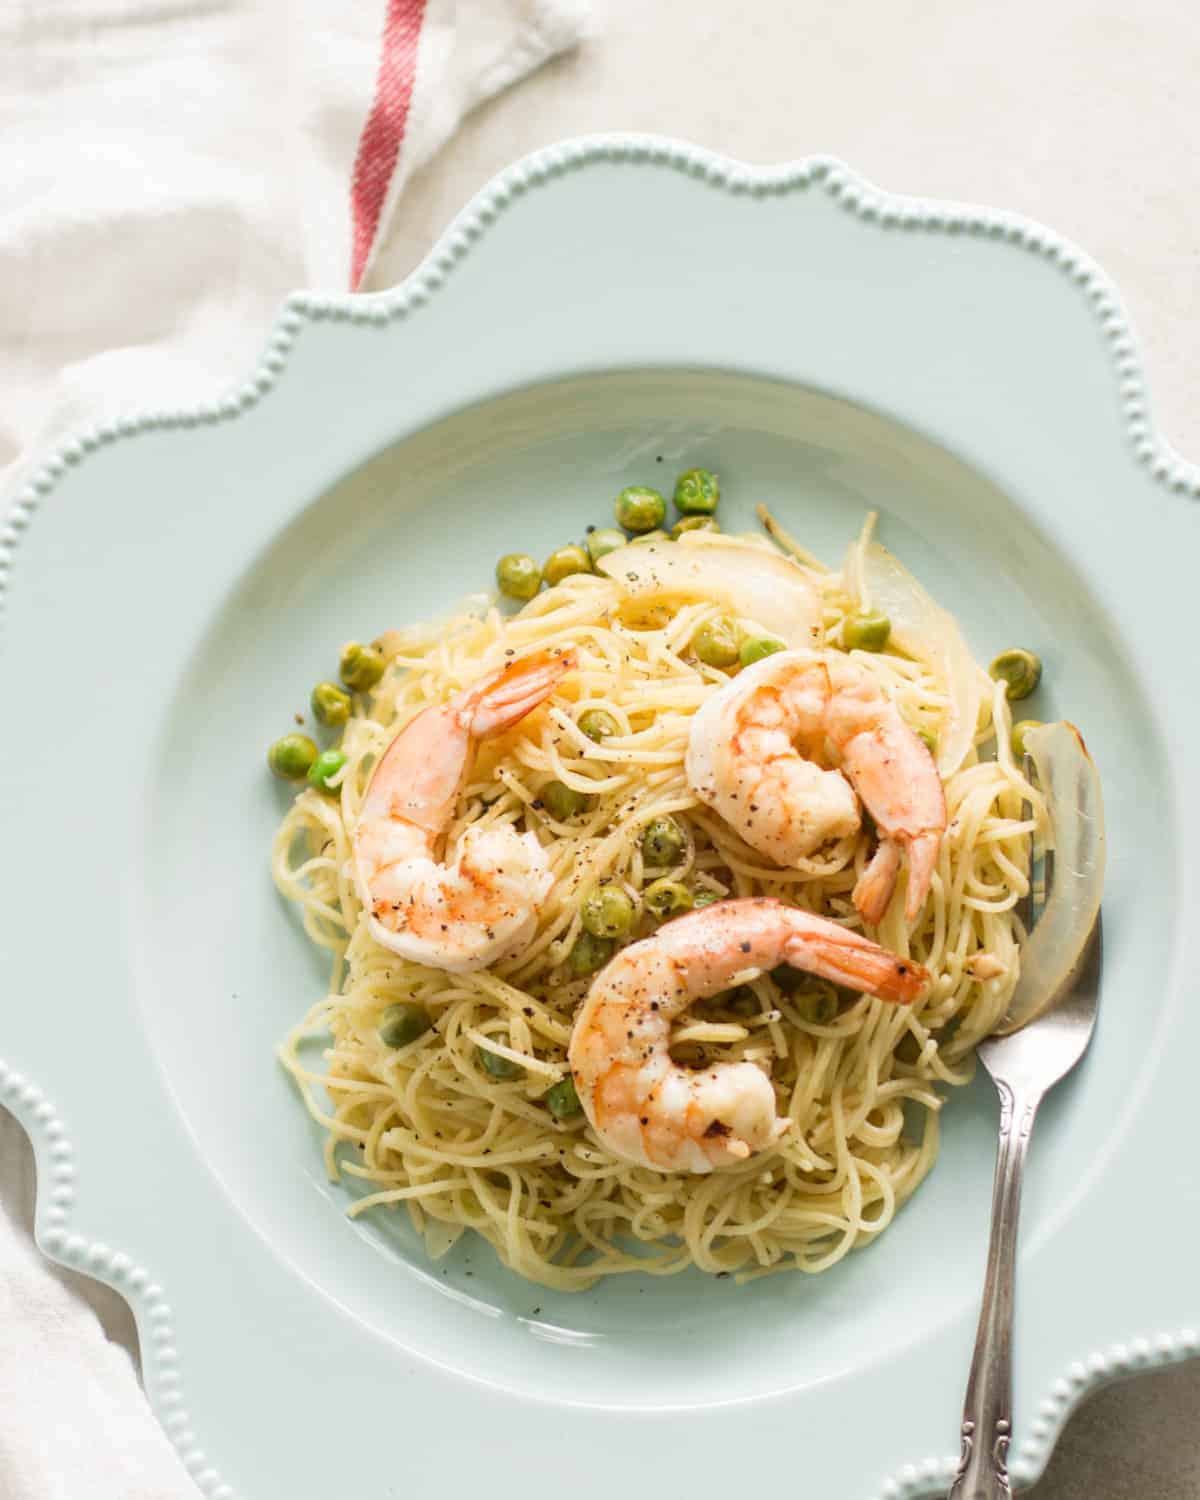 Shrimp scampi with peas served in a light blue plate with a fork